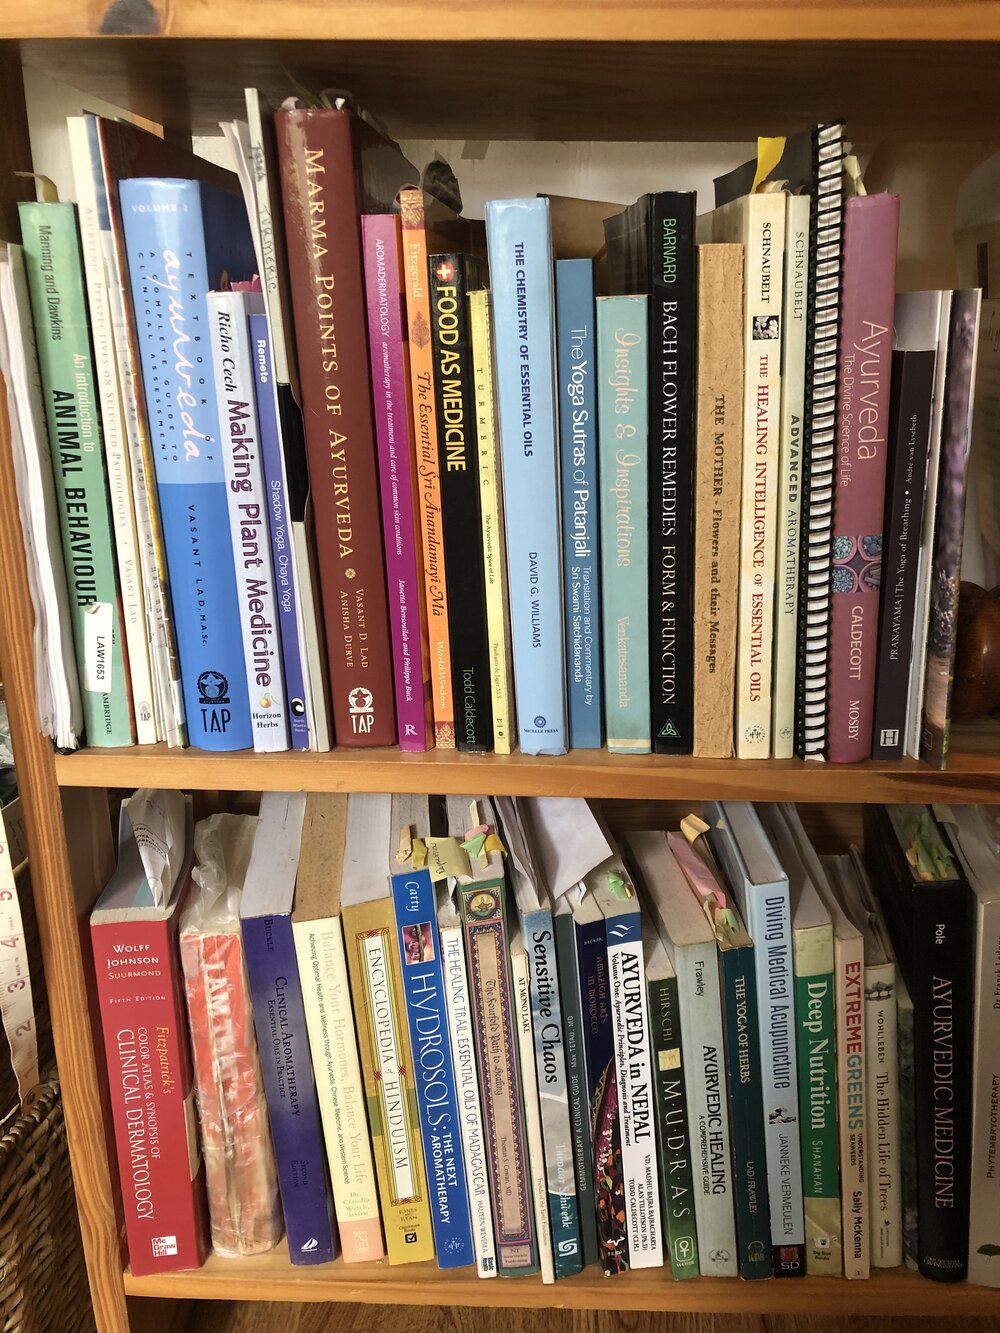 evan's reference books